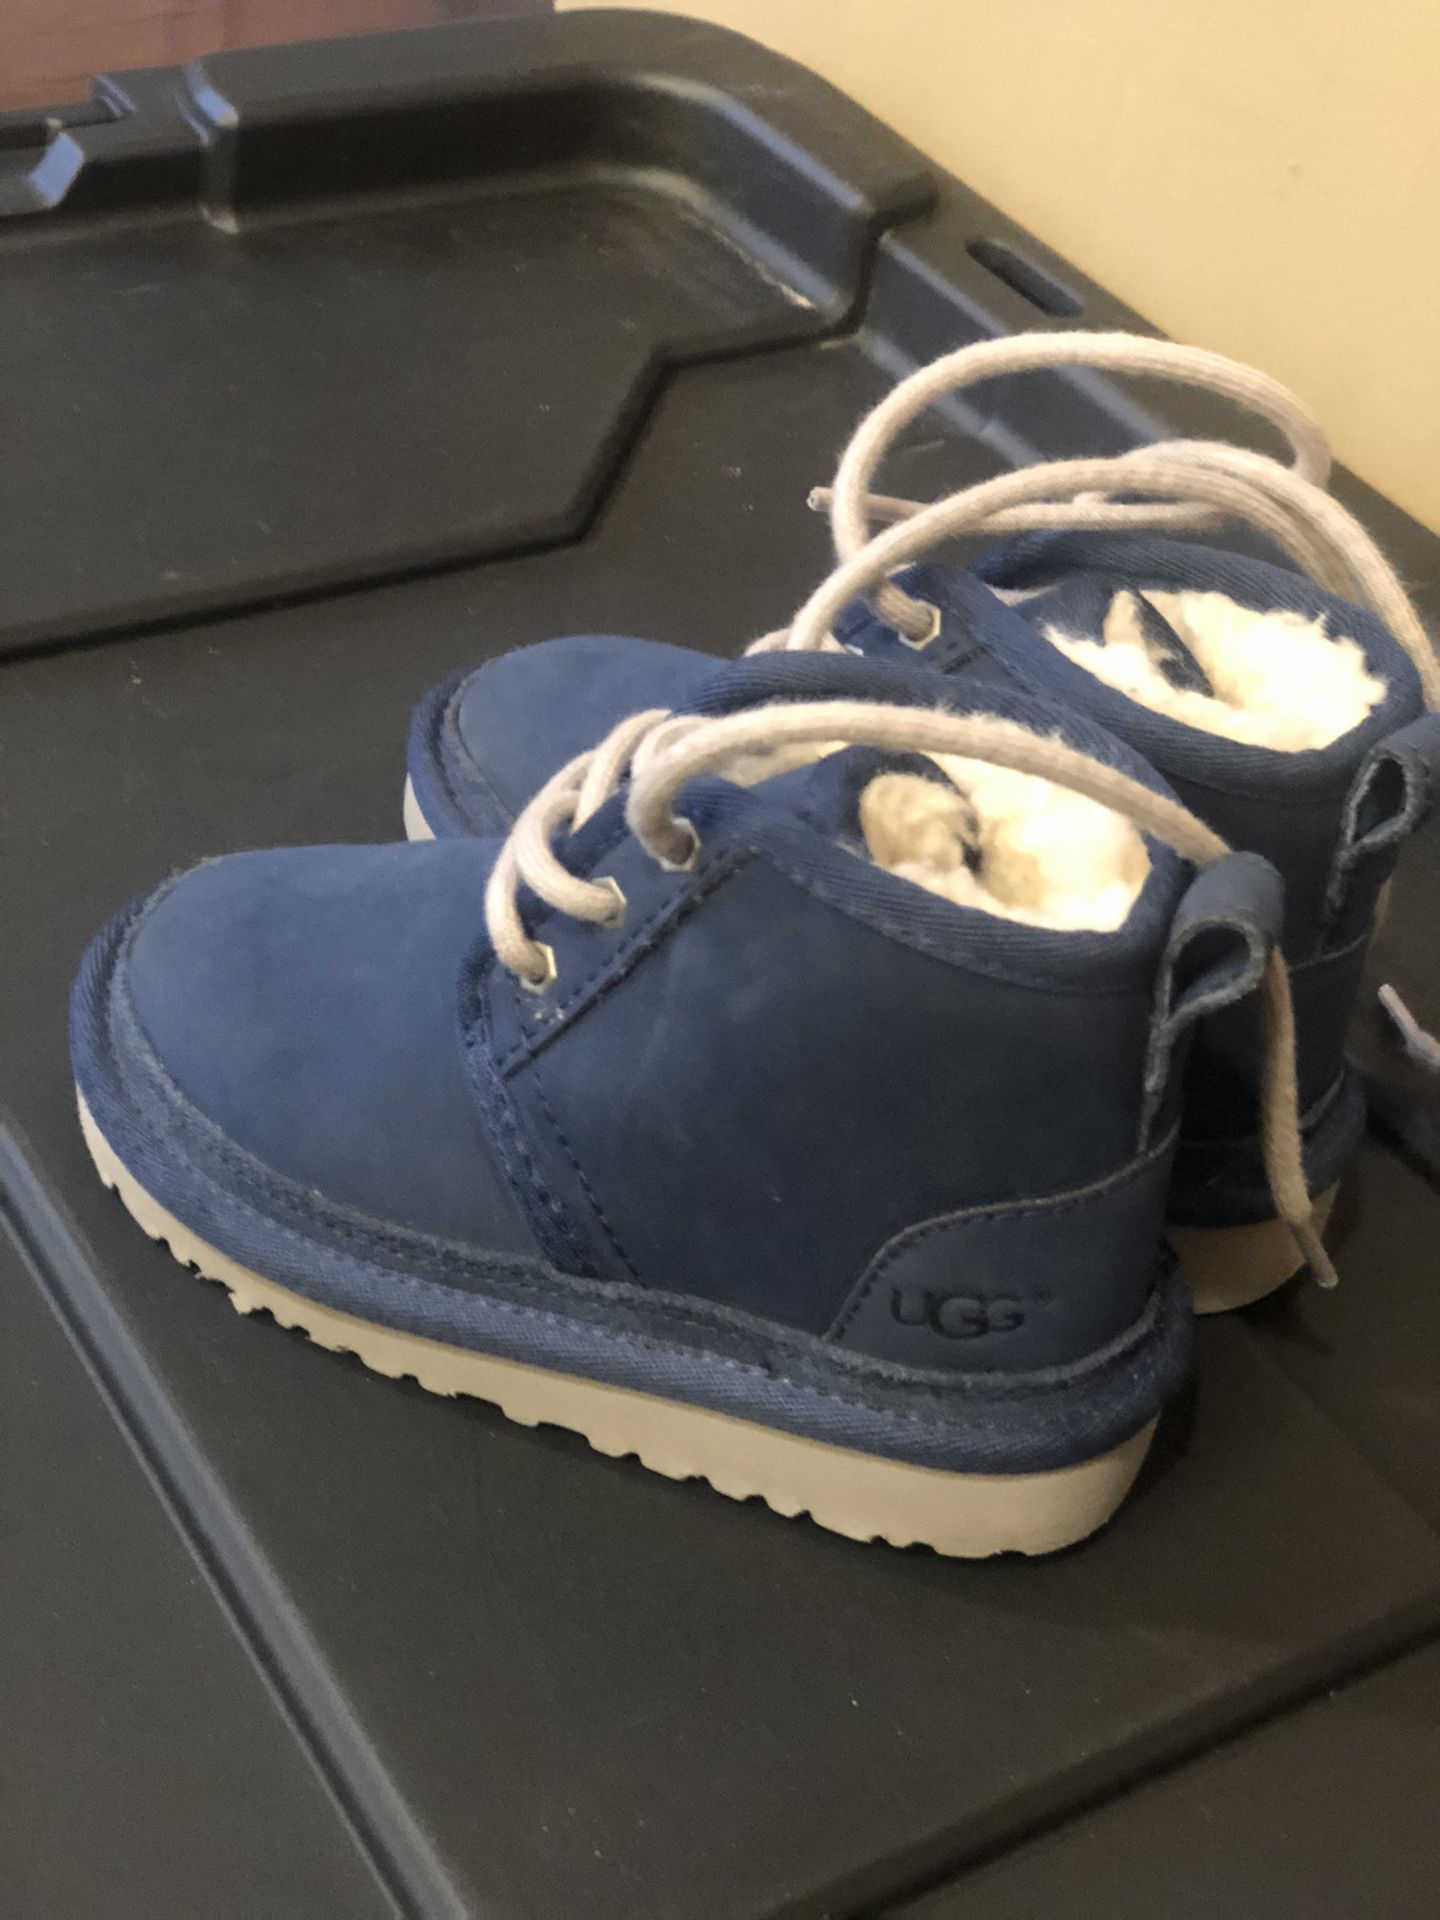 Ugg boots size 8c